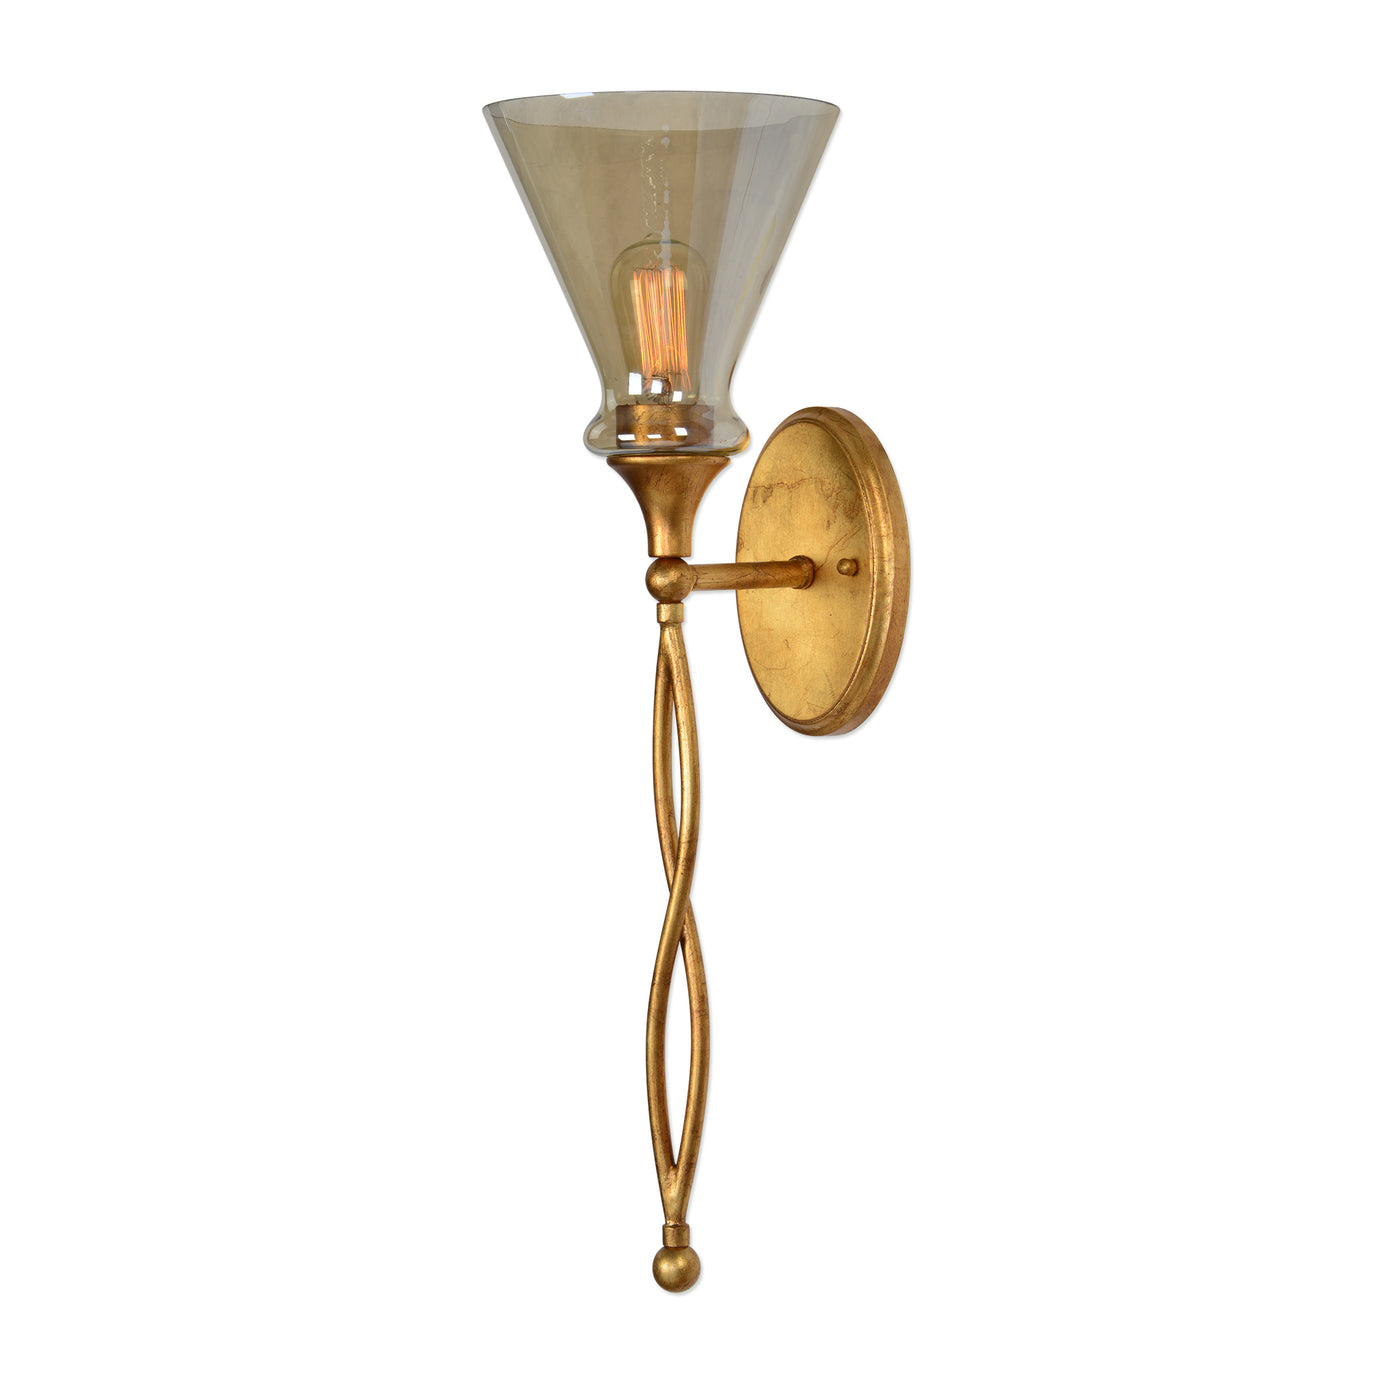 A Glamorous Sconce With An Infinity Design In The Metal Work Of The Tail.  The Rich Antiqued Gold Leaf Finish Complements ...